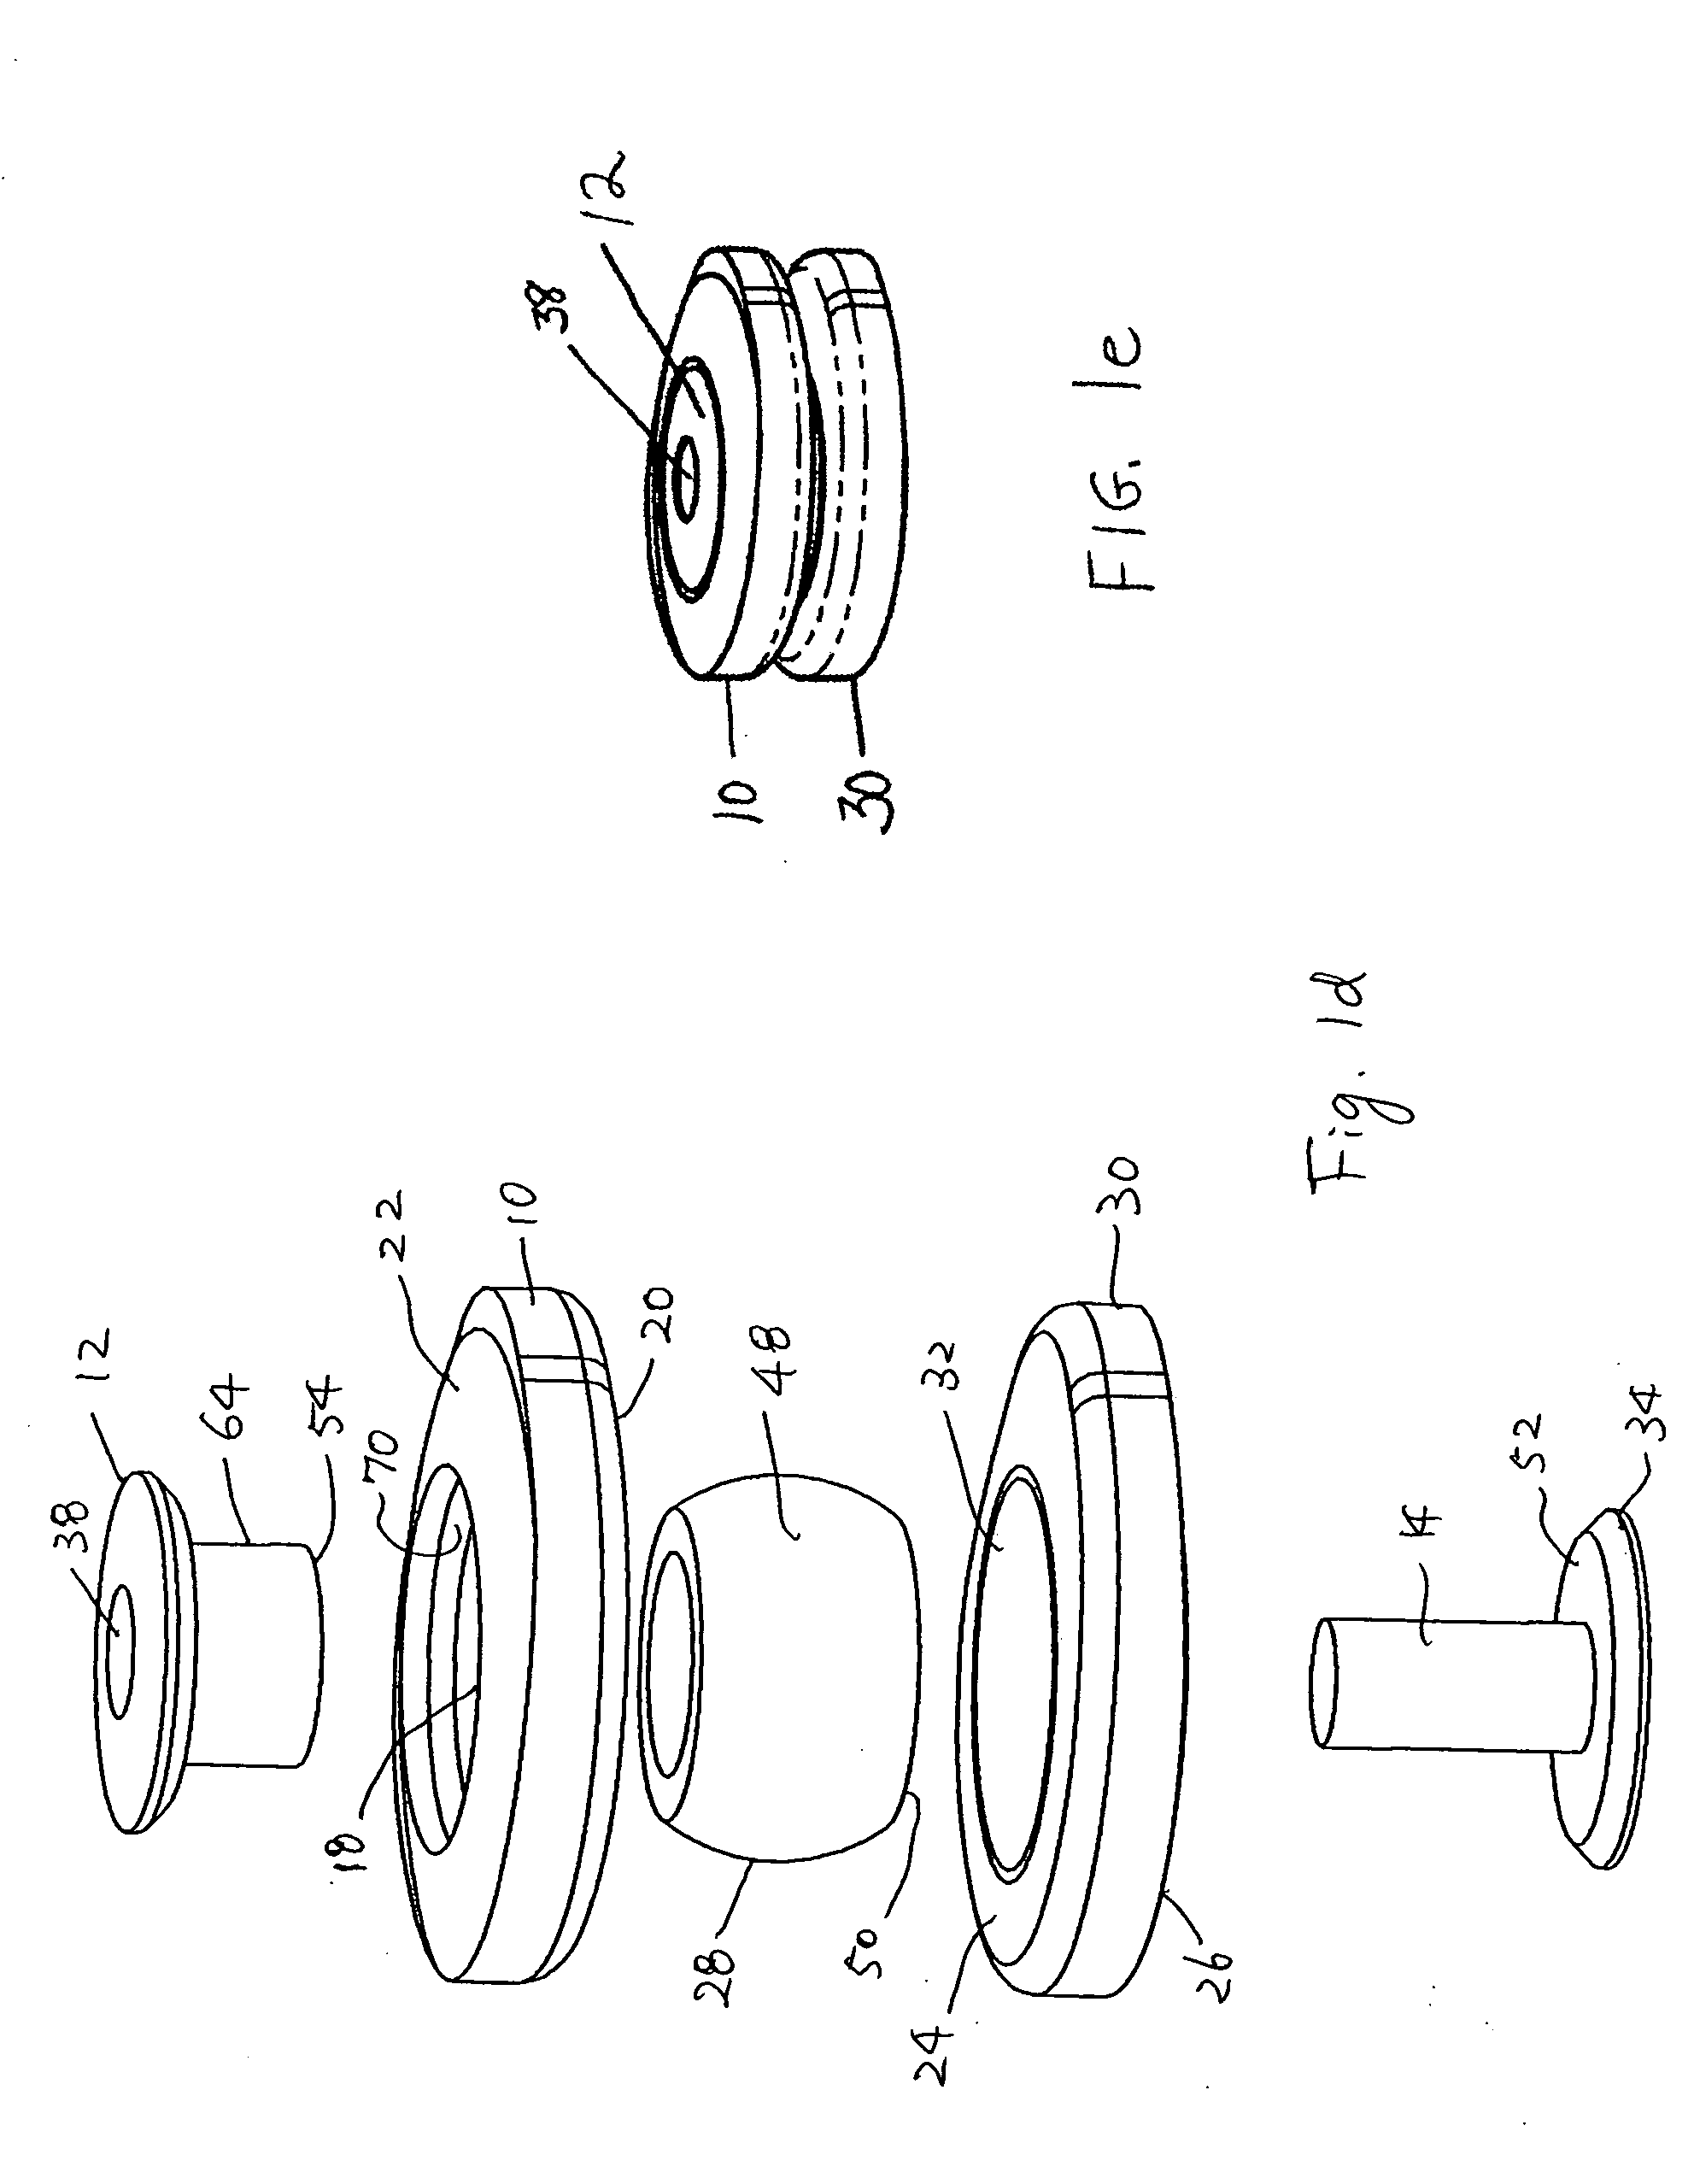 Artificial intervertebral disc having a bored semispherical bearing with a compression locking post and retaining caps